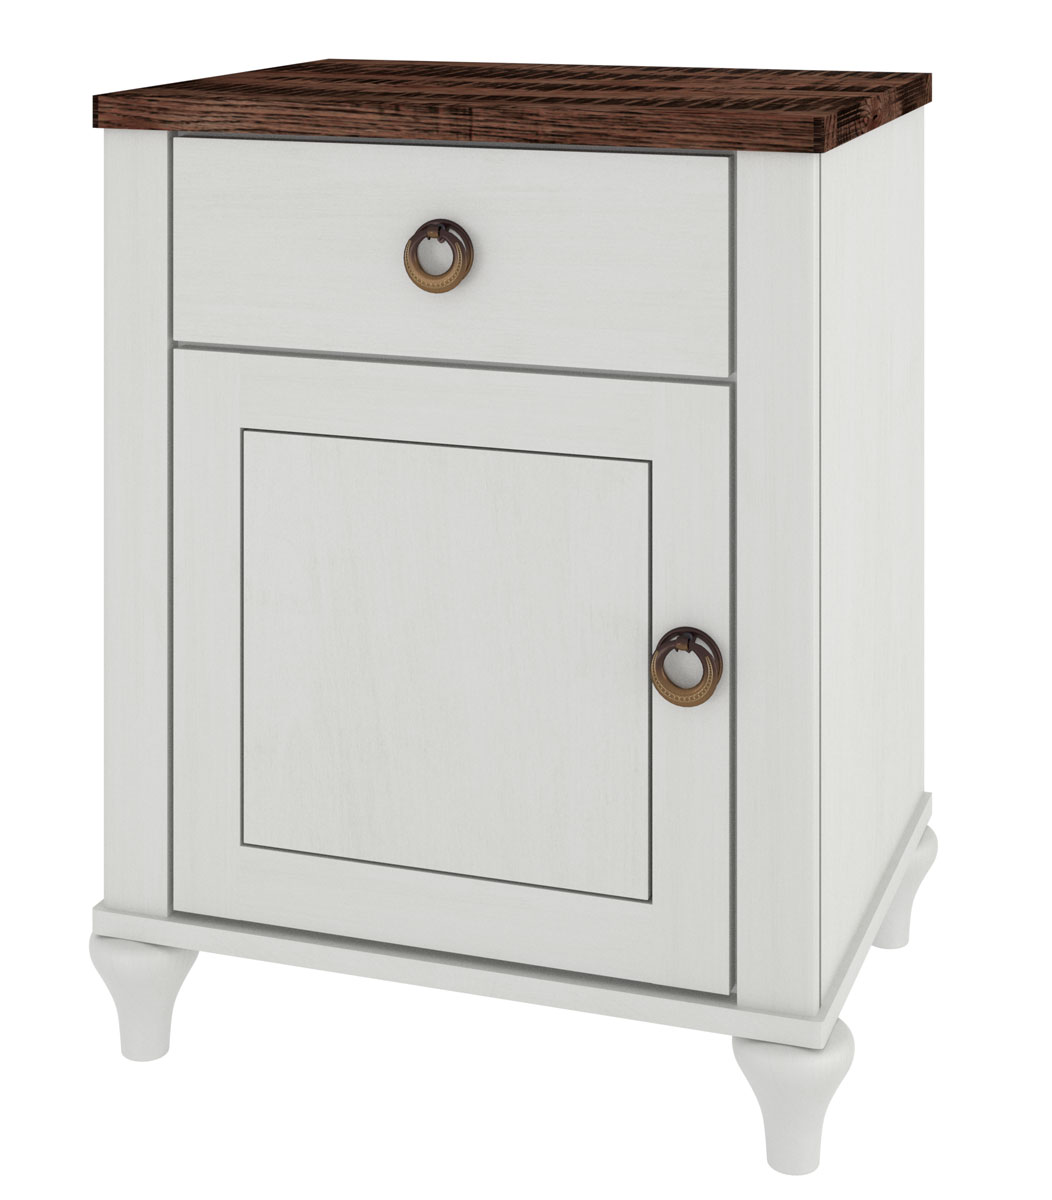 Alcan One Drawer One Door Nightstand in Brown Maple painted with OCS-342 Country White. Rough Sawn White Oak Top with FC-10944 Tavern Stain.